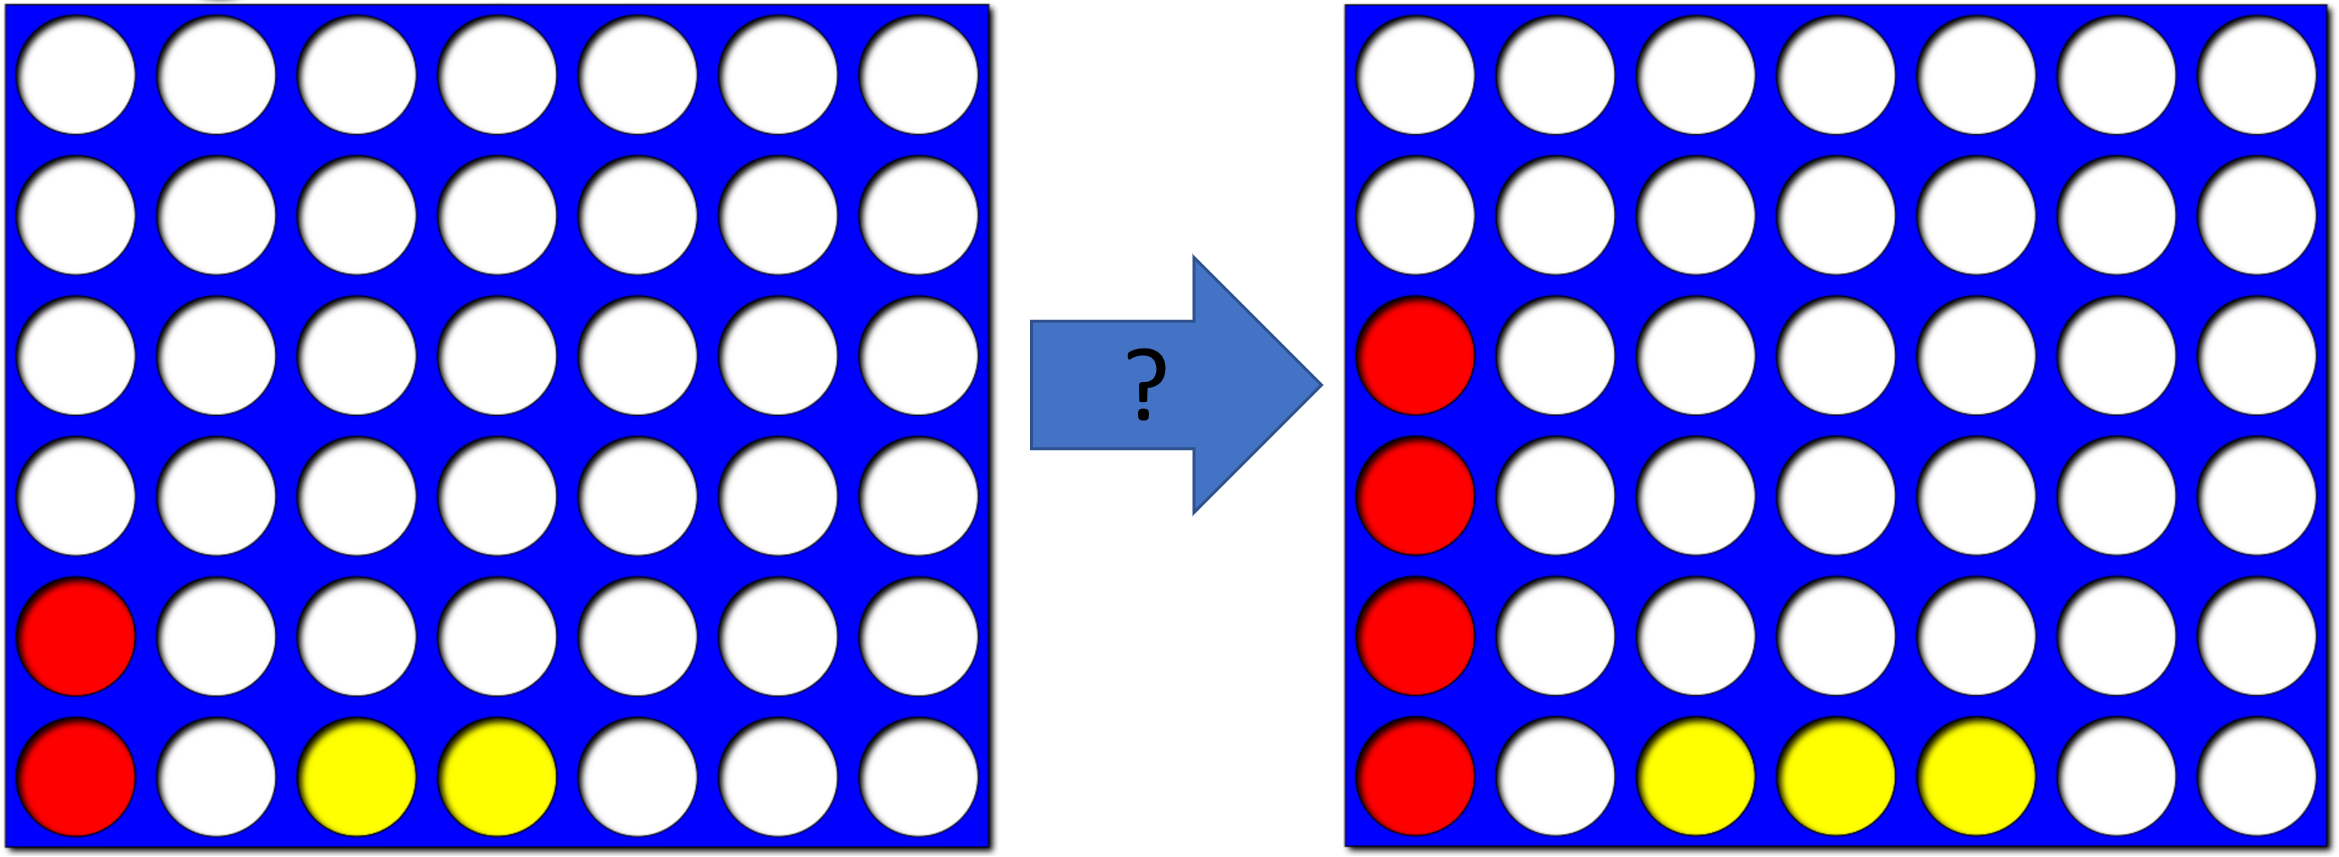 Should Red try to achieve the connect 4 shown on the right?